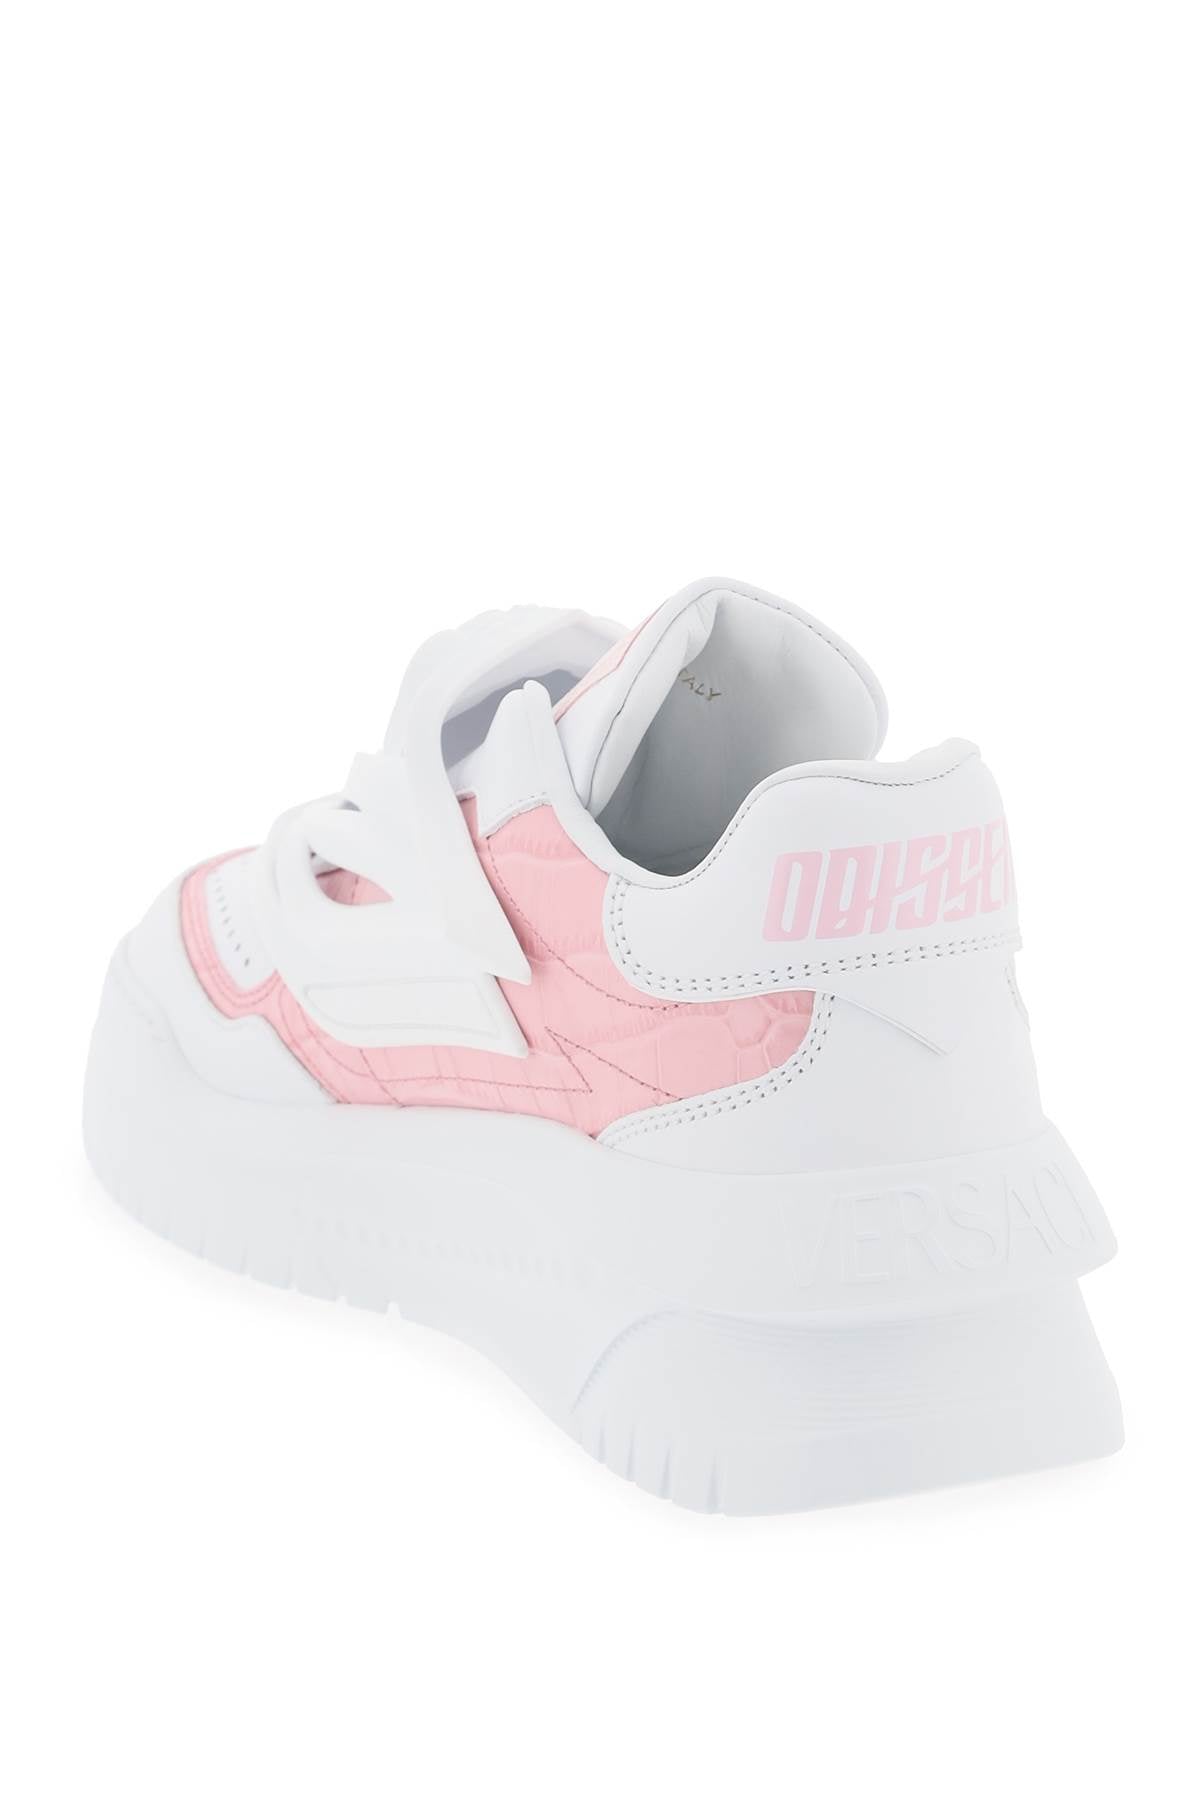 VERSACE White ODISSEA SLIP-ON Shoes for Women